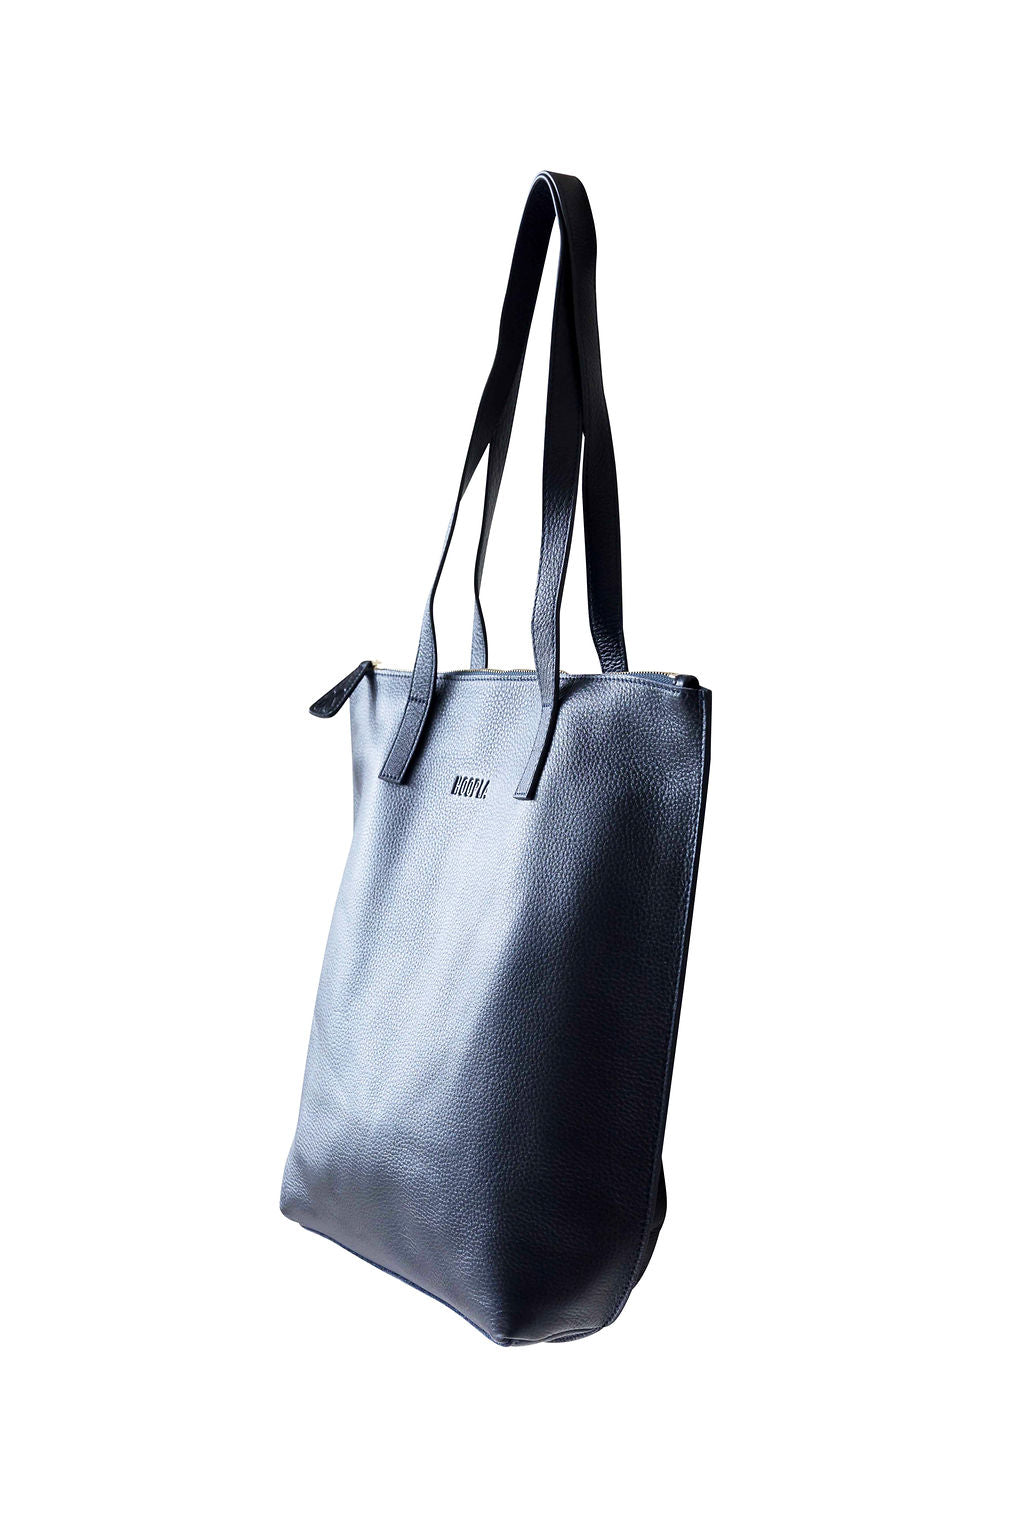 Small Zip Tote - Navy